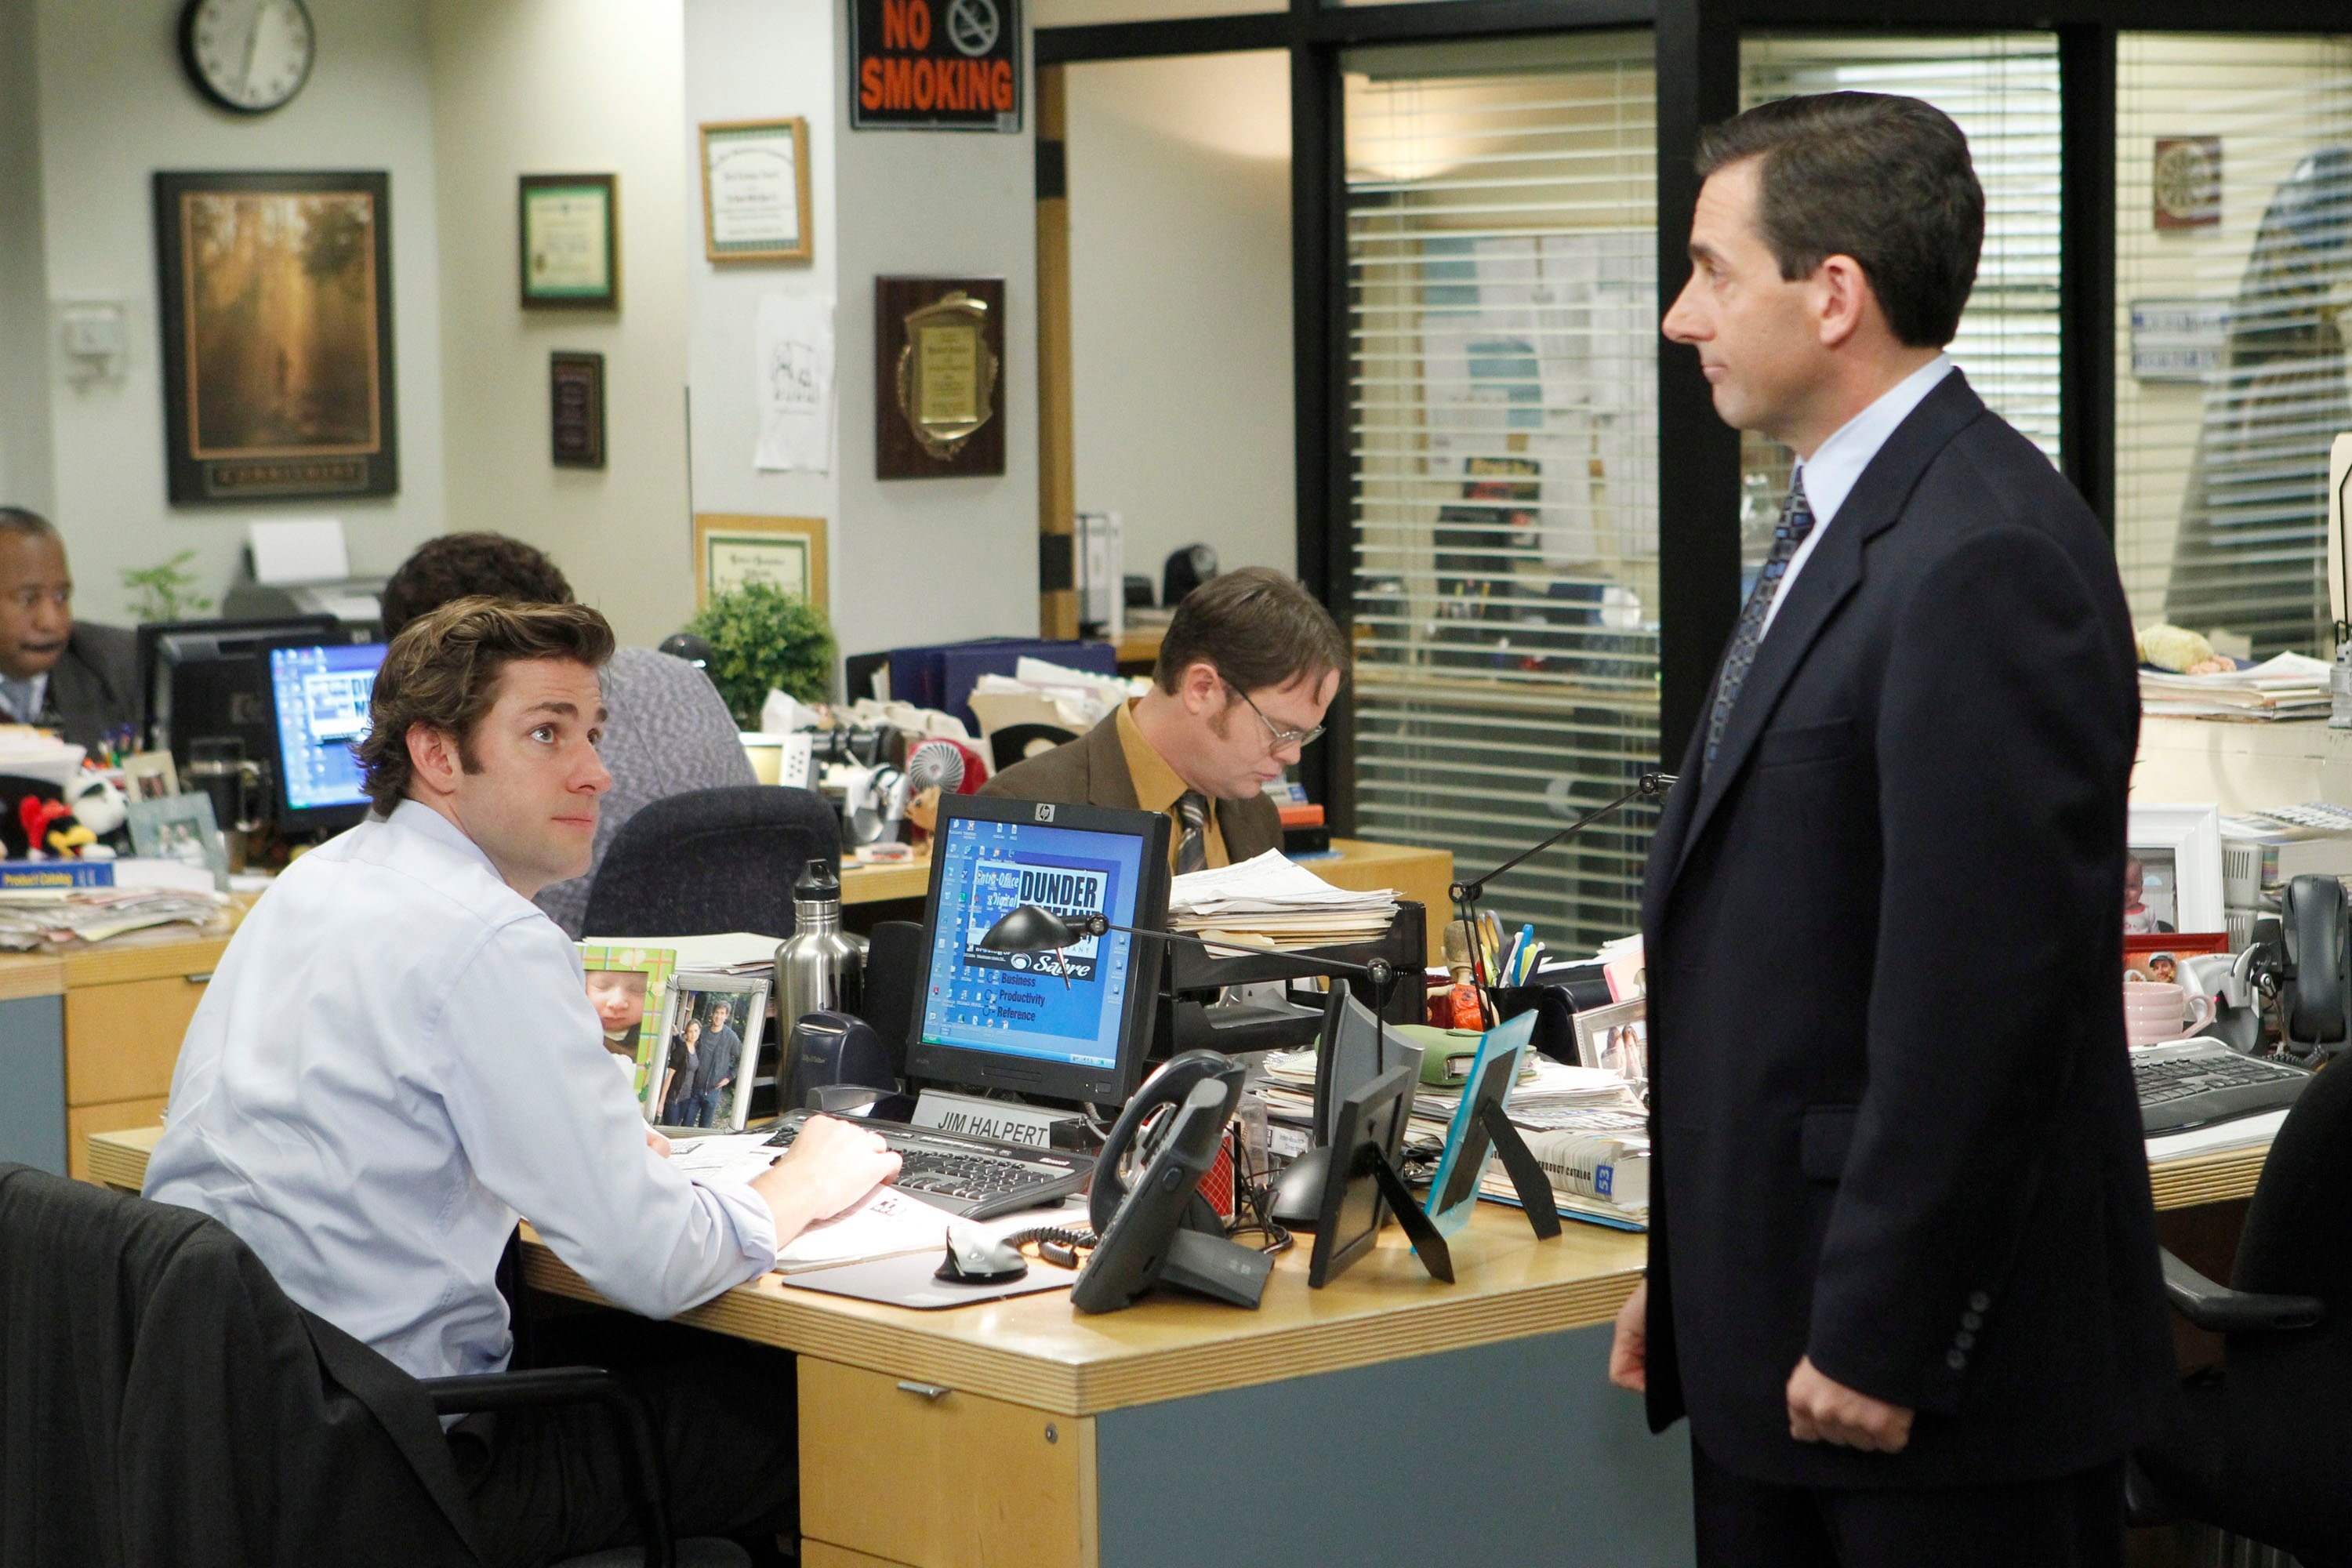 ‘The Office’: The Sentimental Gift Steve Carell Was Given on His Last Day Filming